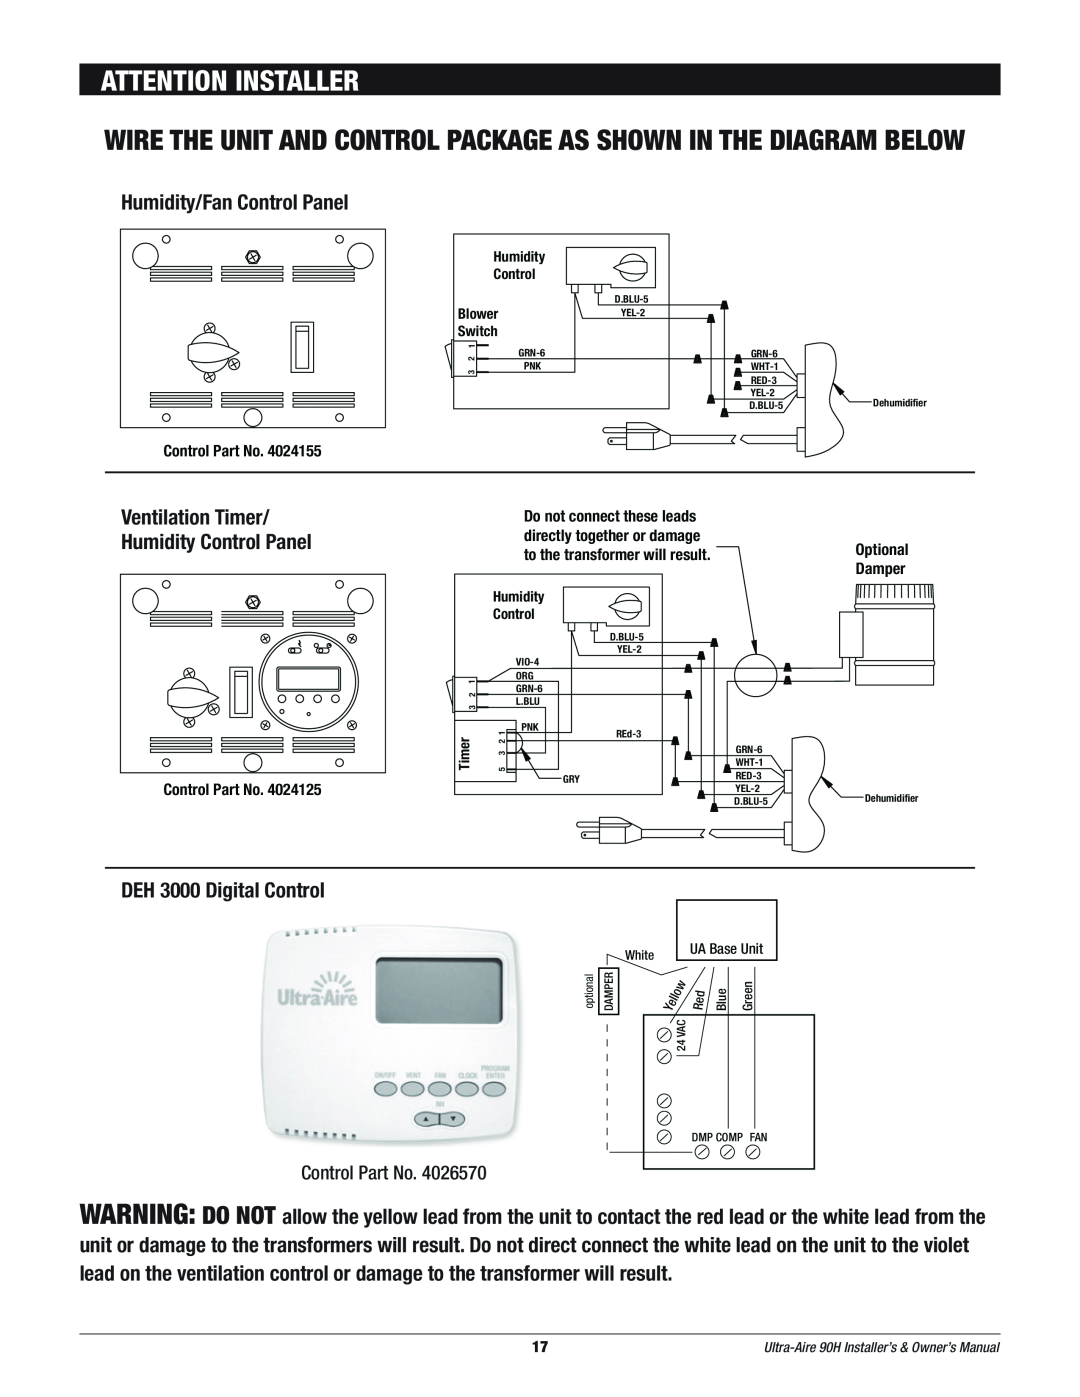 Therma-Stor Products Group 90H owner manual Attention Installer, Humidity/Fan Control Panel, DEH 3000 Digital Control 